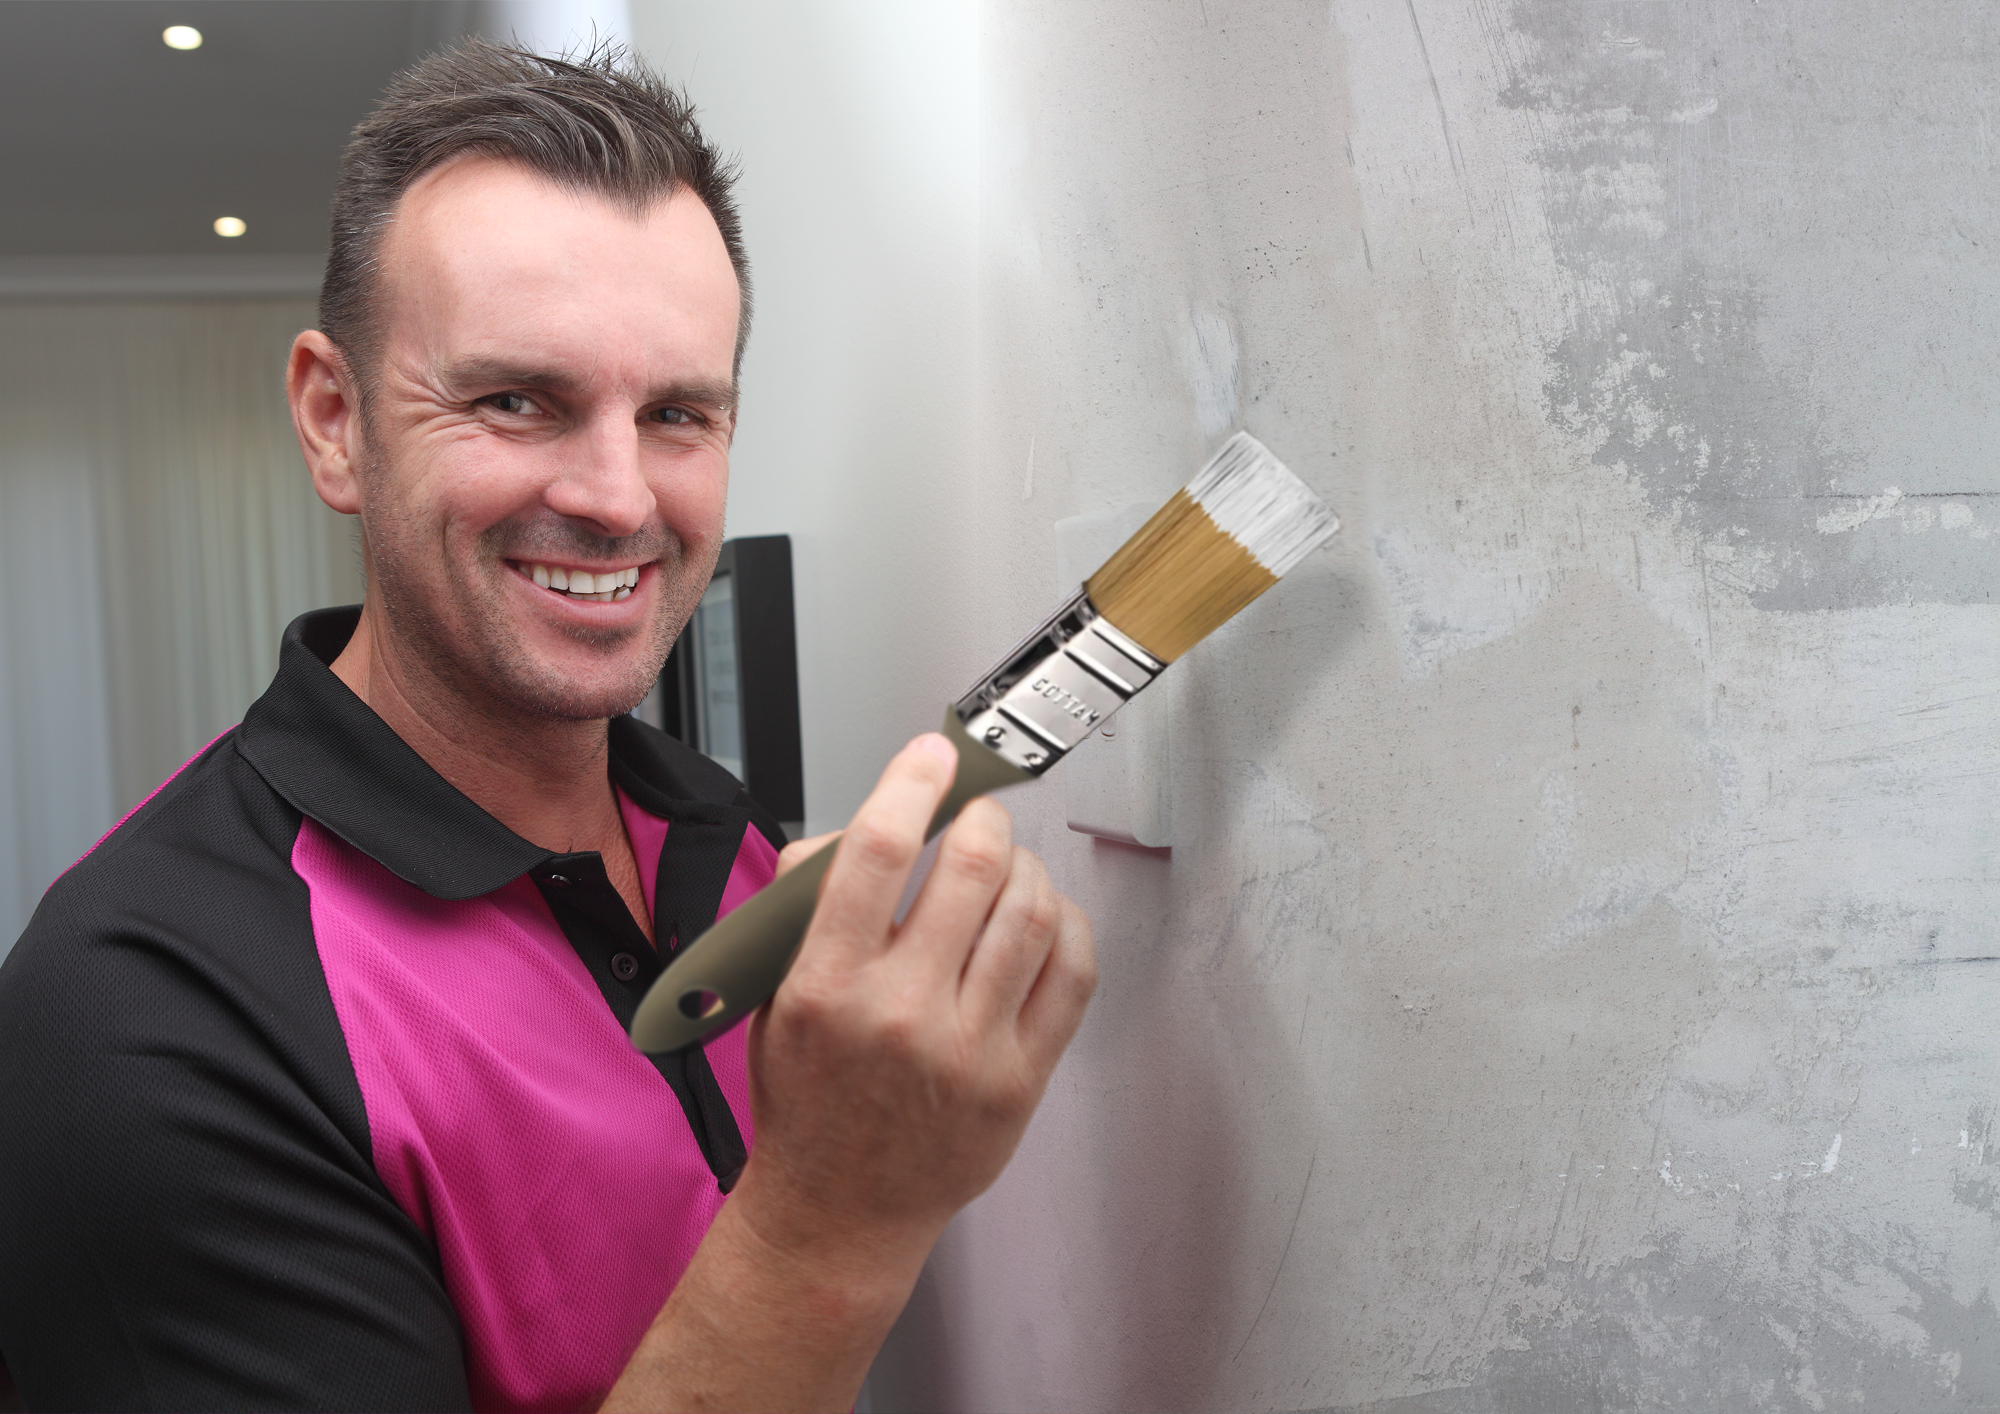 Get your painting done right with Hire A Hubby.